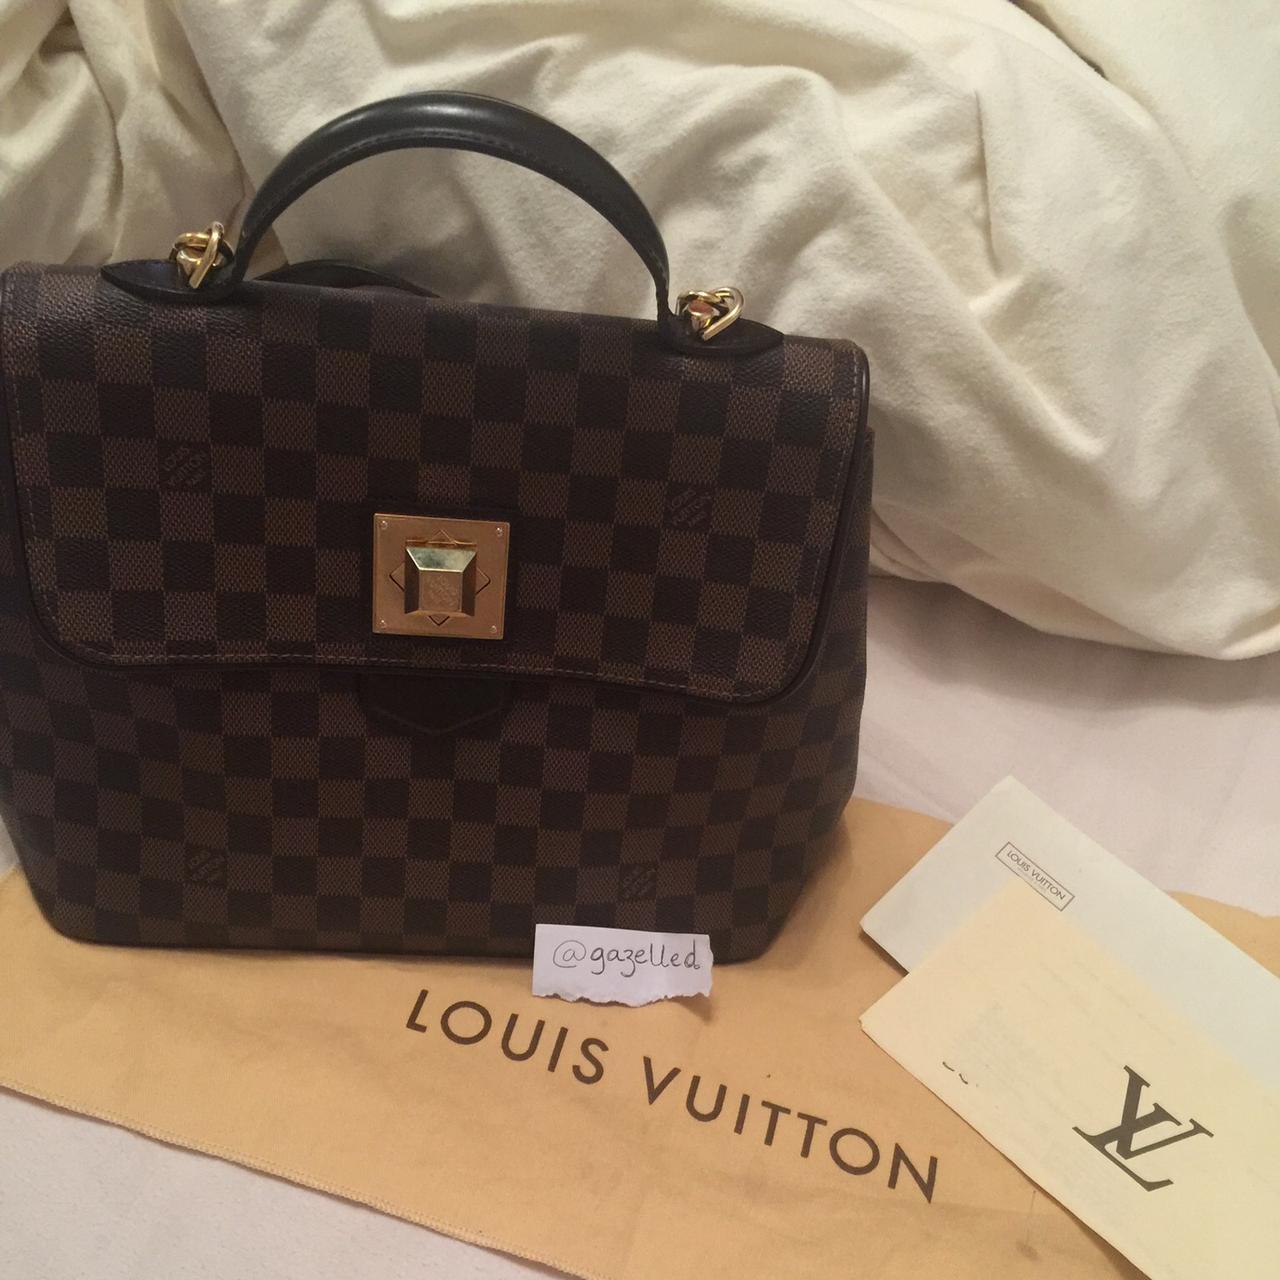 Louis Vuitton Bergamo MM Handbag, Damier Ebene Details .:   * 100% AUTHENTIC GOODS - 100% WORRY-FREE * is Largest  Online Store and Retail Outlet in Australia to BUY, SELL, CONSIGN Pre-Owned